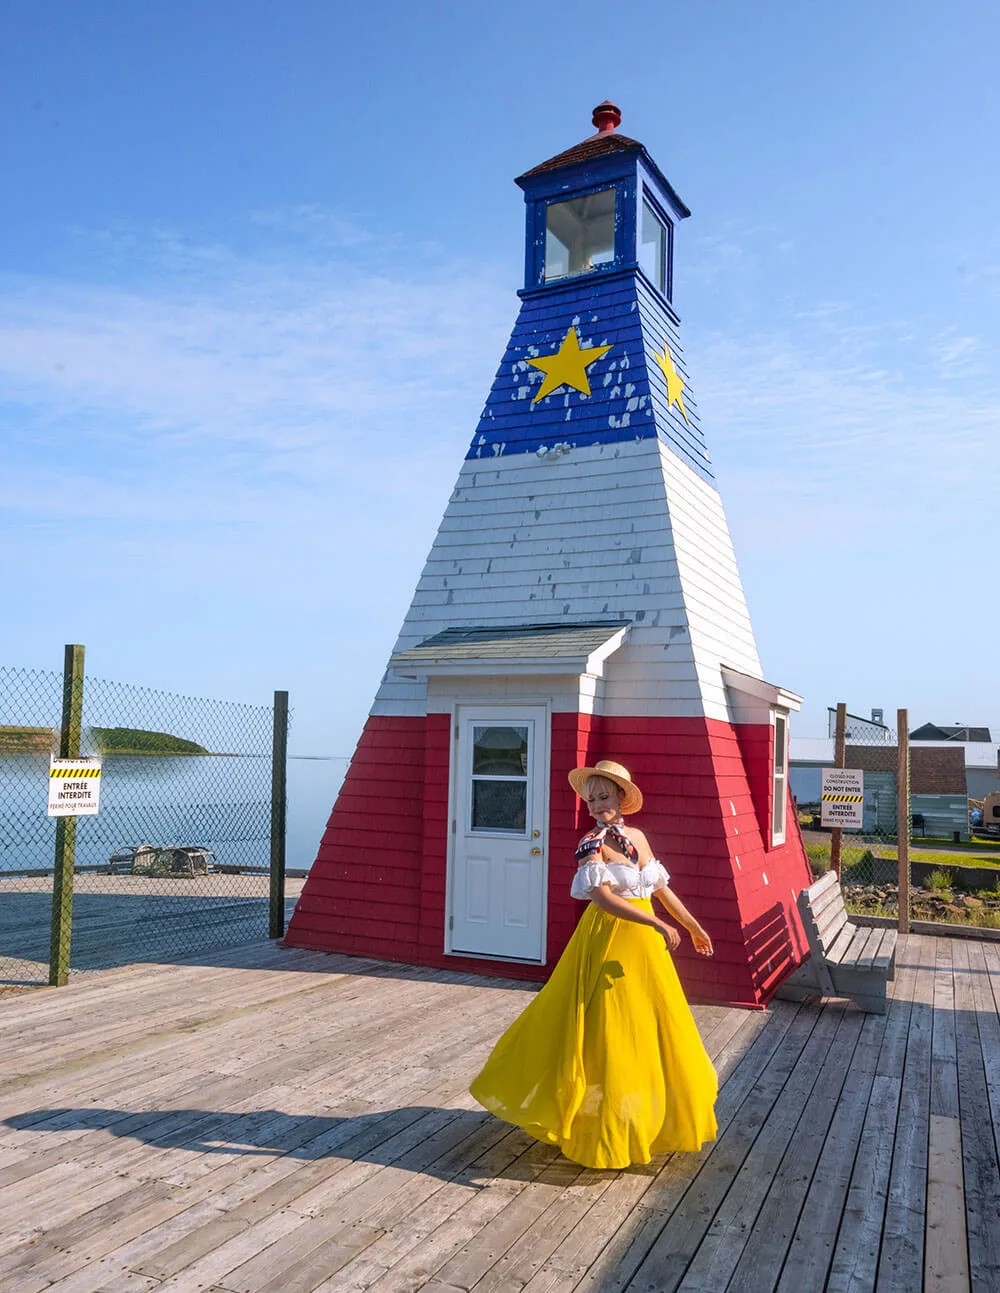 Planning a trip to Cape Breton soon? This guide includes all of the best things to do in Cape Breton Island! From activities and attractions, to the top restaurants, hikes, and all the things you'll want to see along the famous Cabot Trial. You won't want to miss this guide that will help you plan the perfect getaway to Cape Breton. Click for the full list. Pictured here: Chéticamp Lighthouse